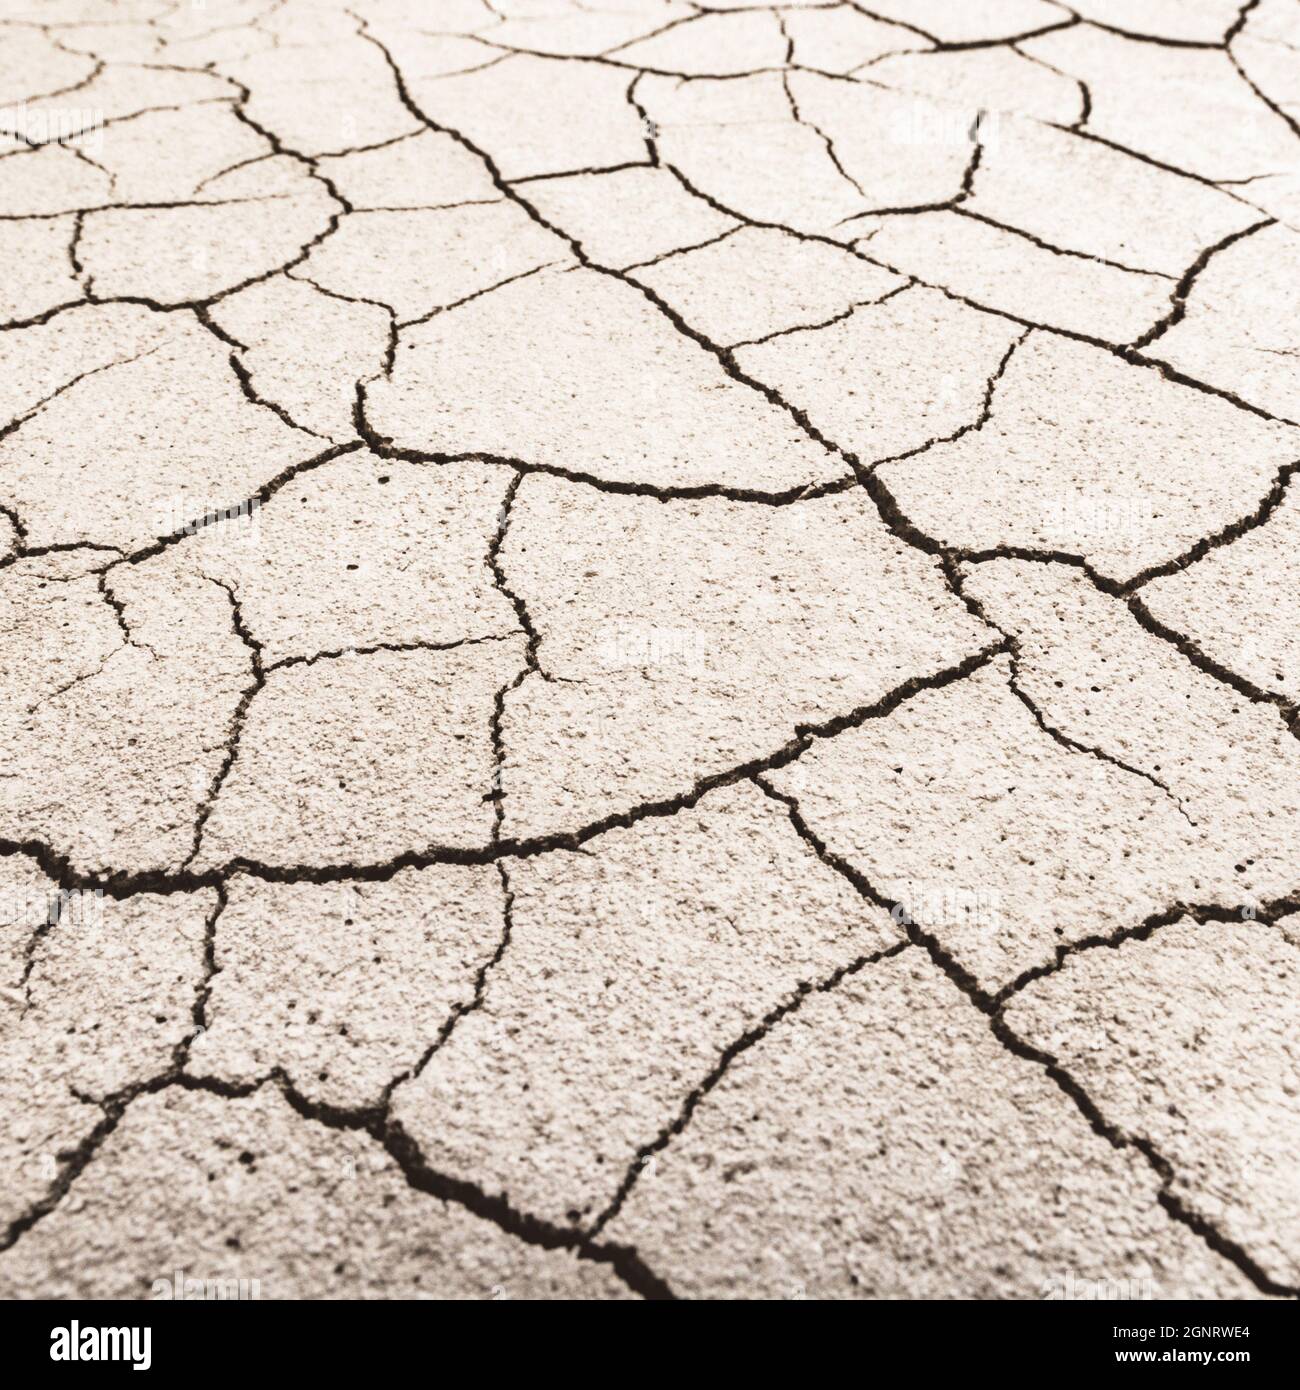 Close shot cracked dry earth. For water crisis, UK drought, parched earth, crop loss, European / US heatwave, hot summer, aridification, subsidence. Stock Photo